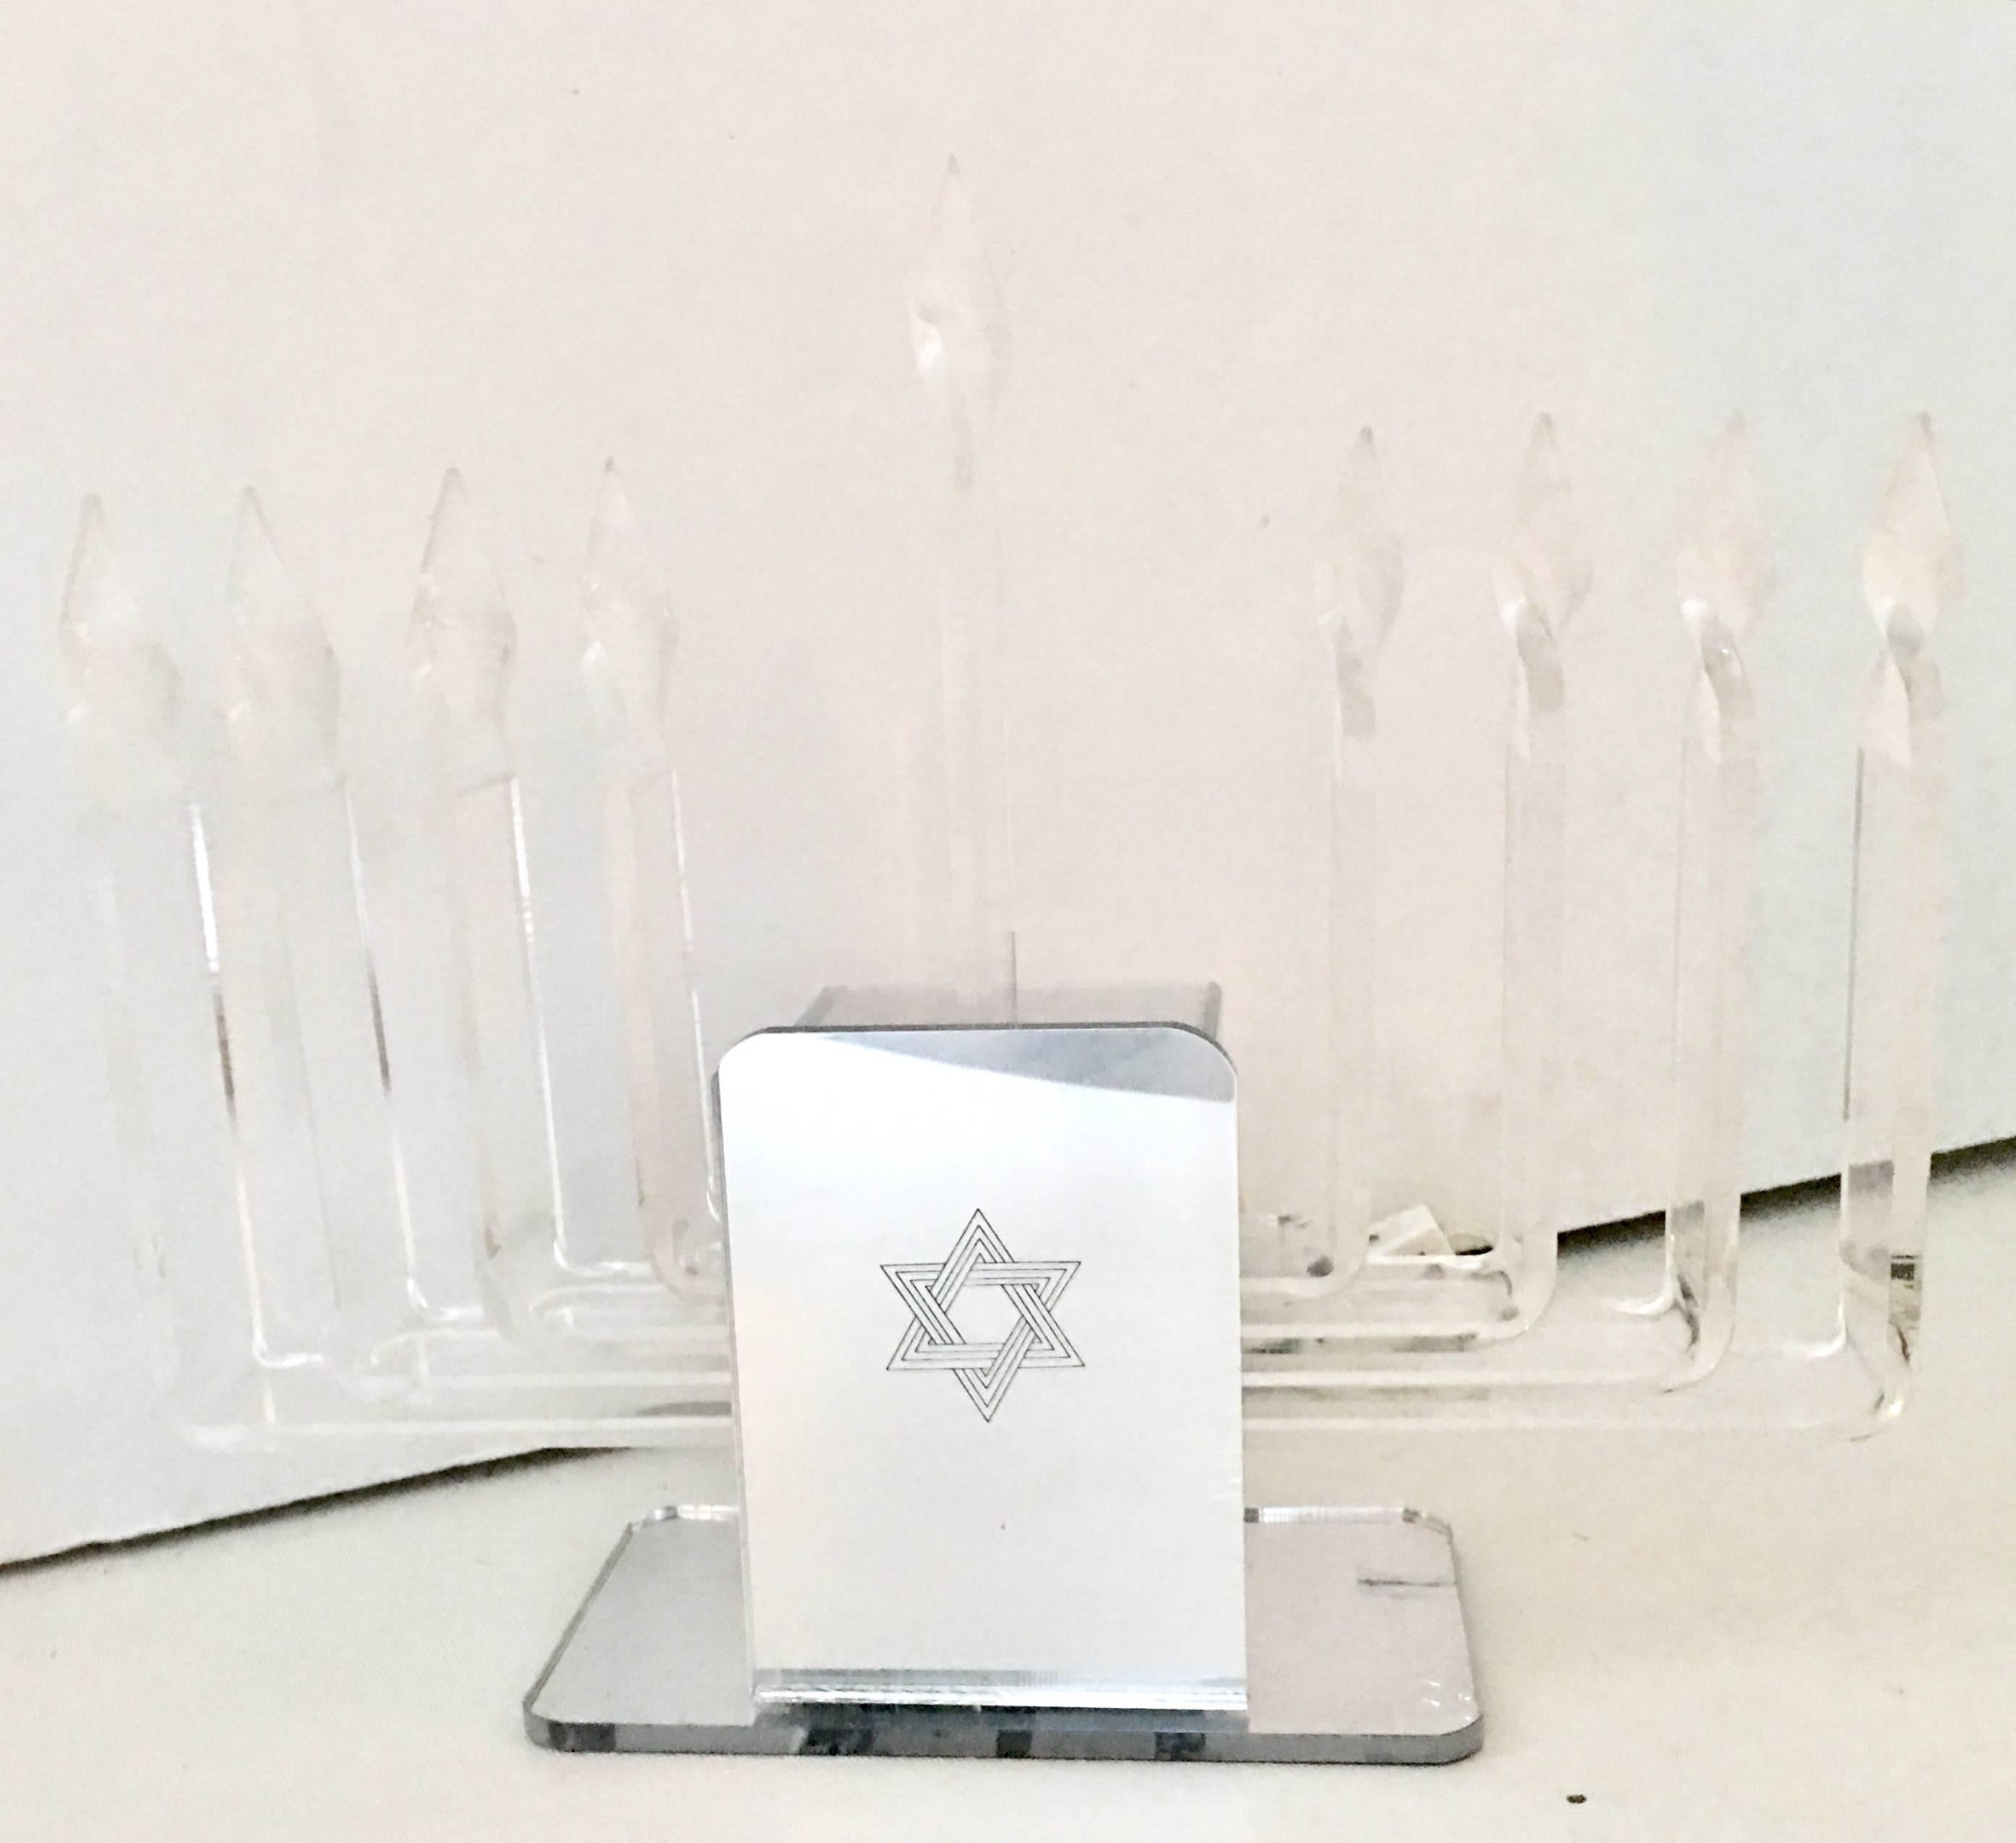 1970'S MOD Lucite mirrored nine-light Judaica electrified and adjustable Hanukkah Menorah
This menorah features the nine candle lights of Hanukkah, each one has the ability to light adjust separately or all at once for each night of Hanukkah. The